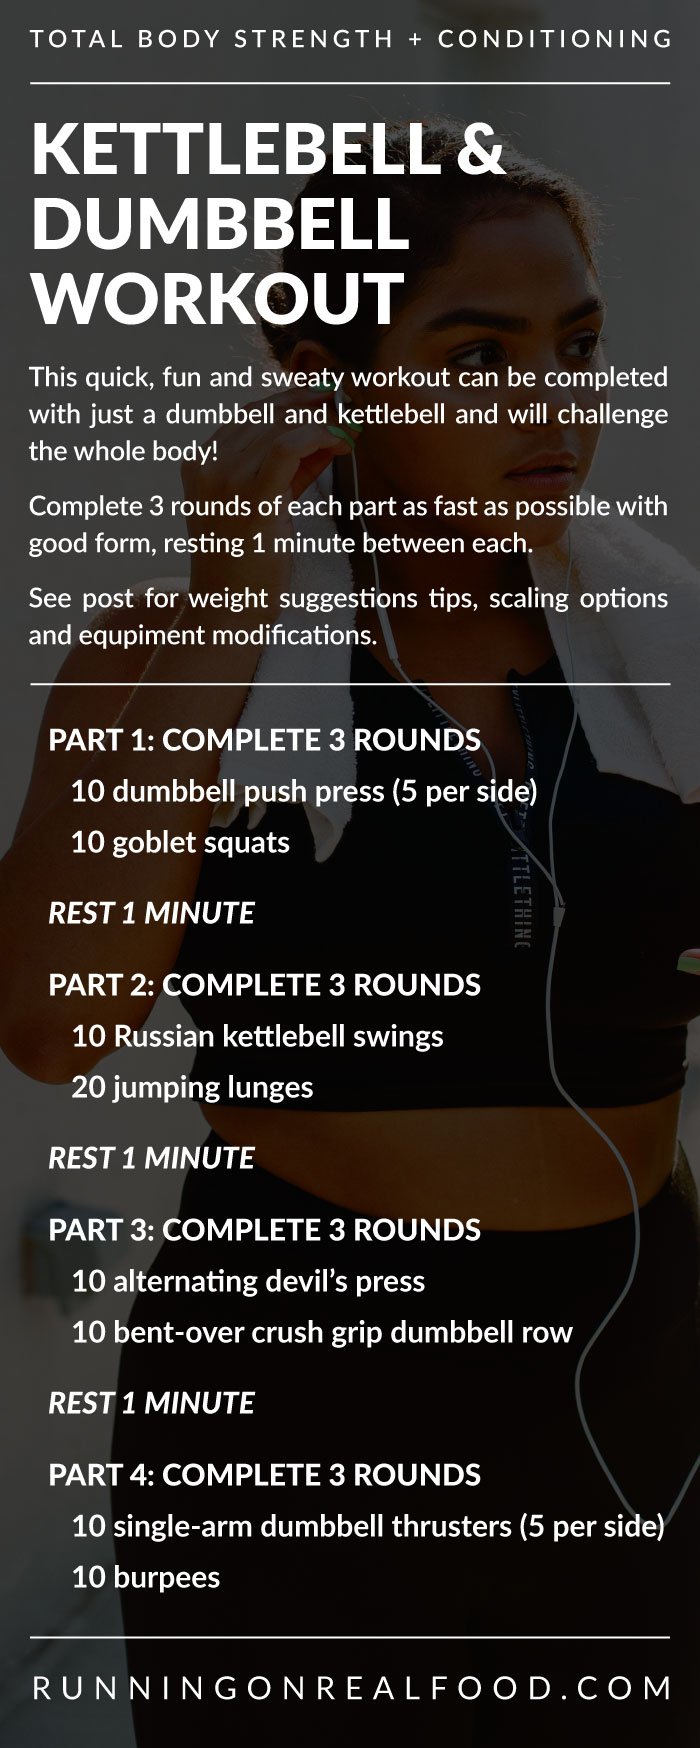 Written workout instructions for a kettlebell and dumbbell workout.